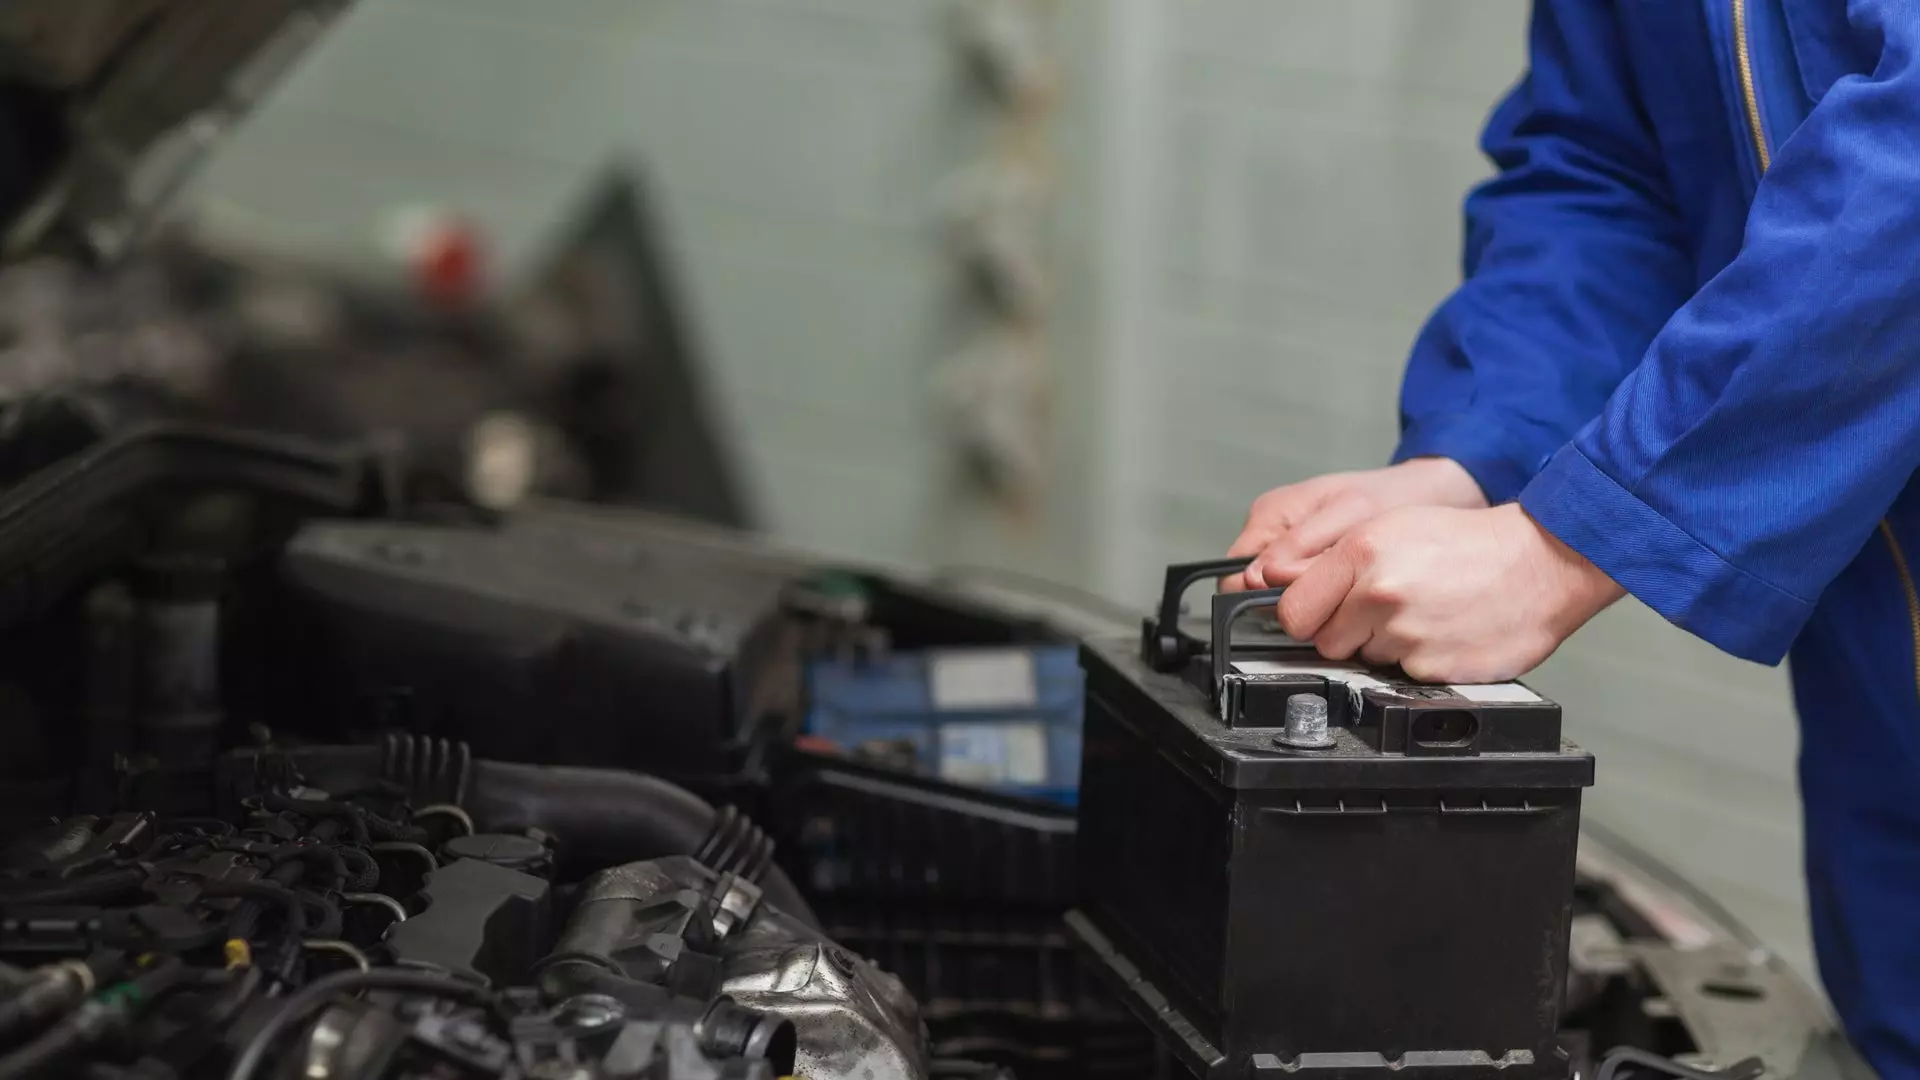 How To Test a Car Battery Without Equipment